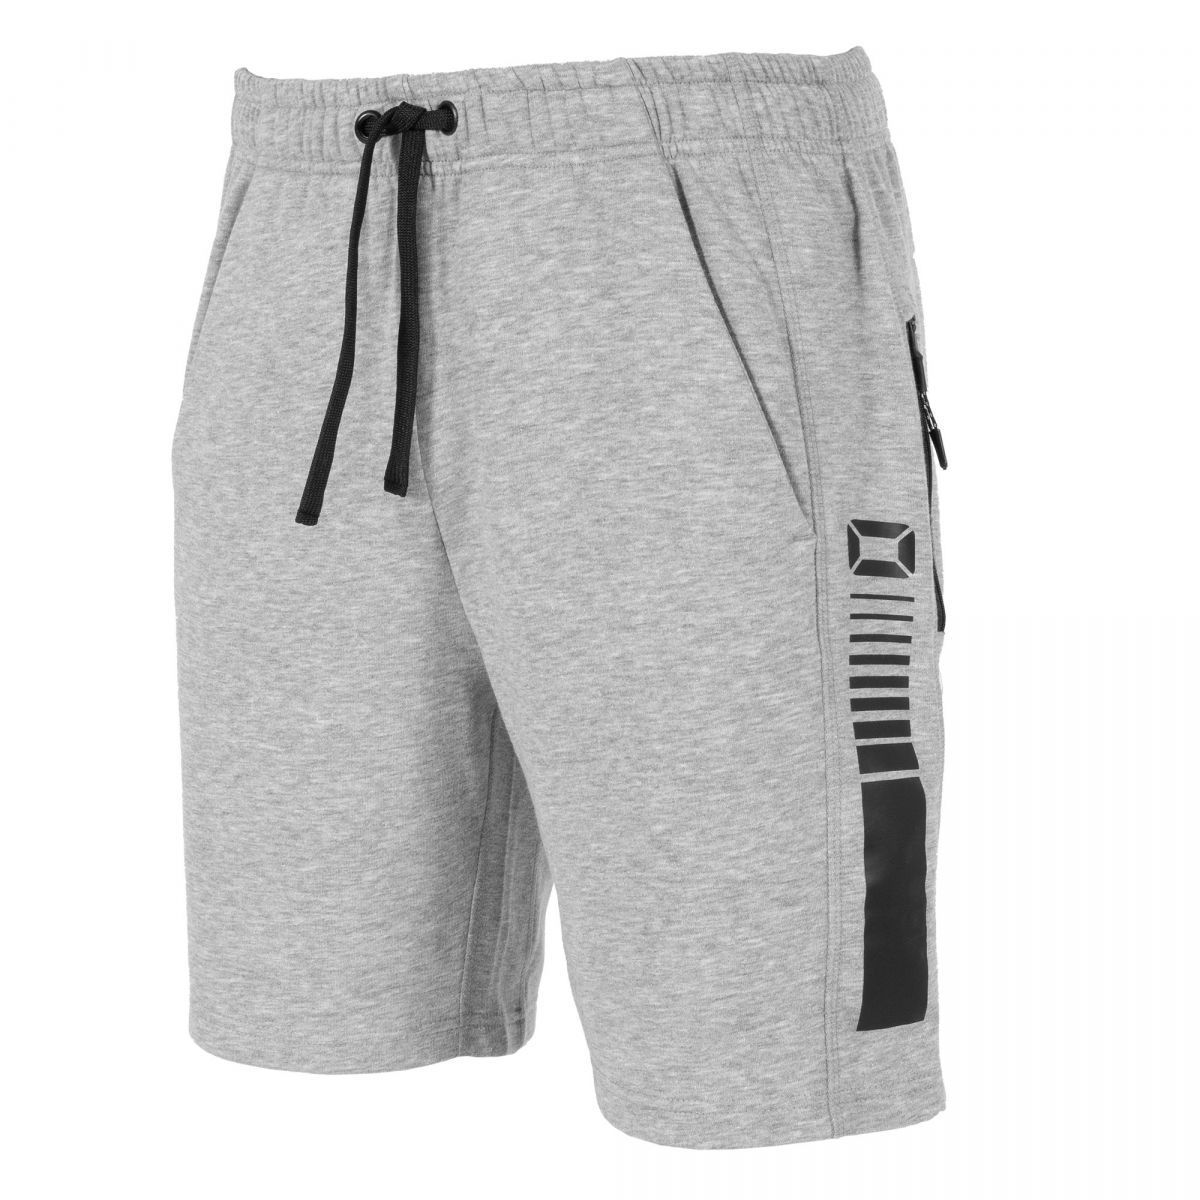 Stanno Ease Sweat Shorts